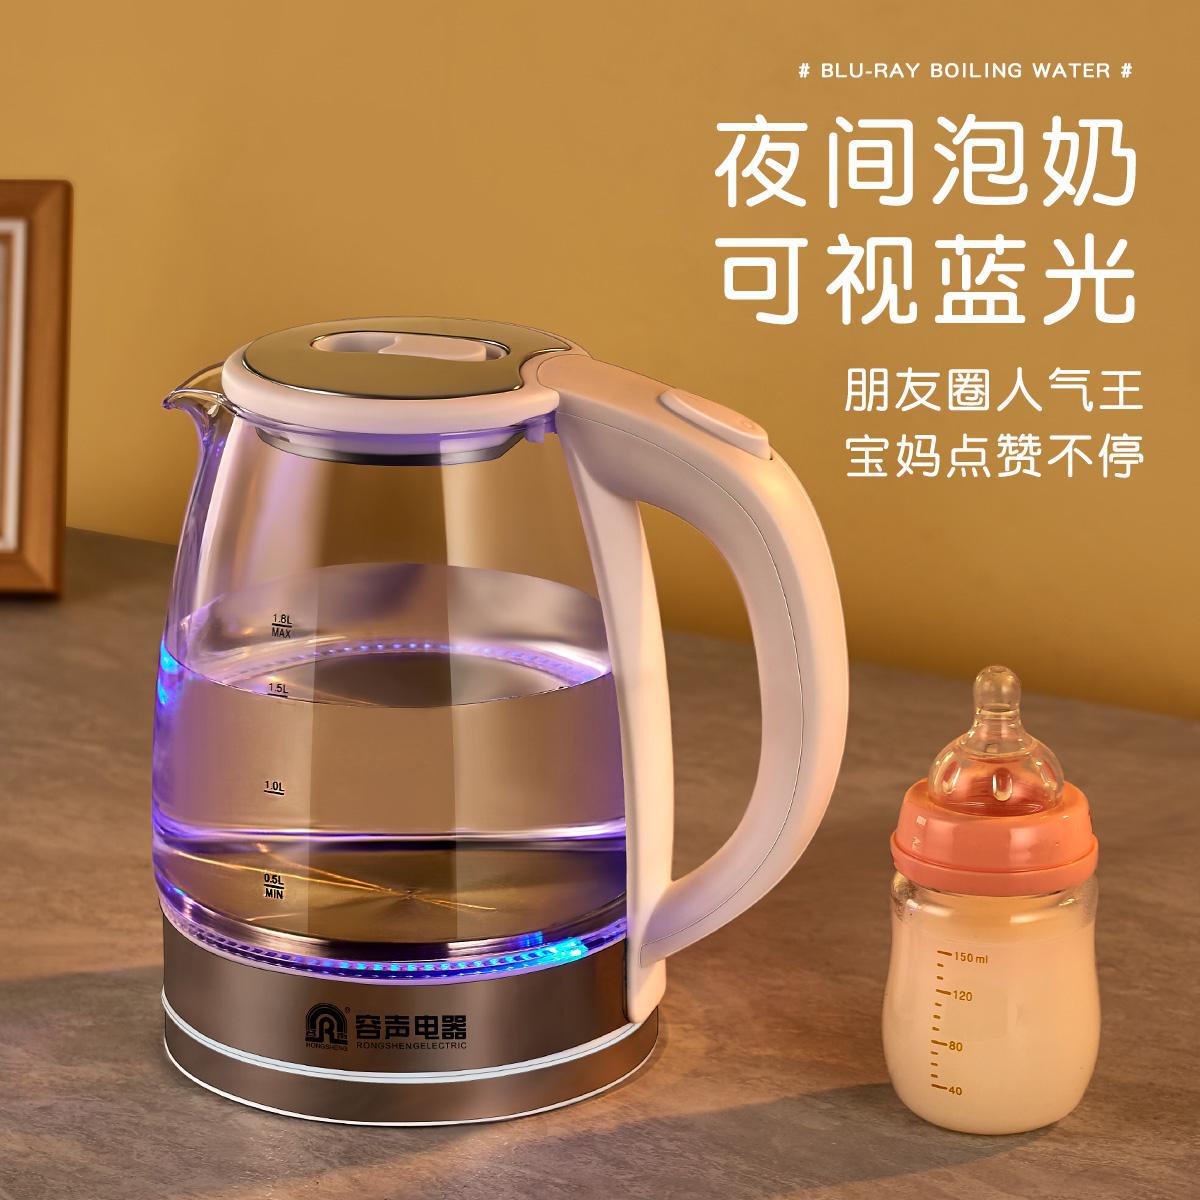 Authentic Ronshen Electric Kettle Household Large Capacity Glass Automatic Power off Health Pot Hotel Gift Wholesale